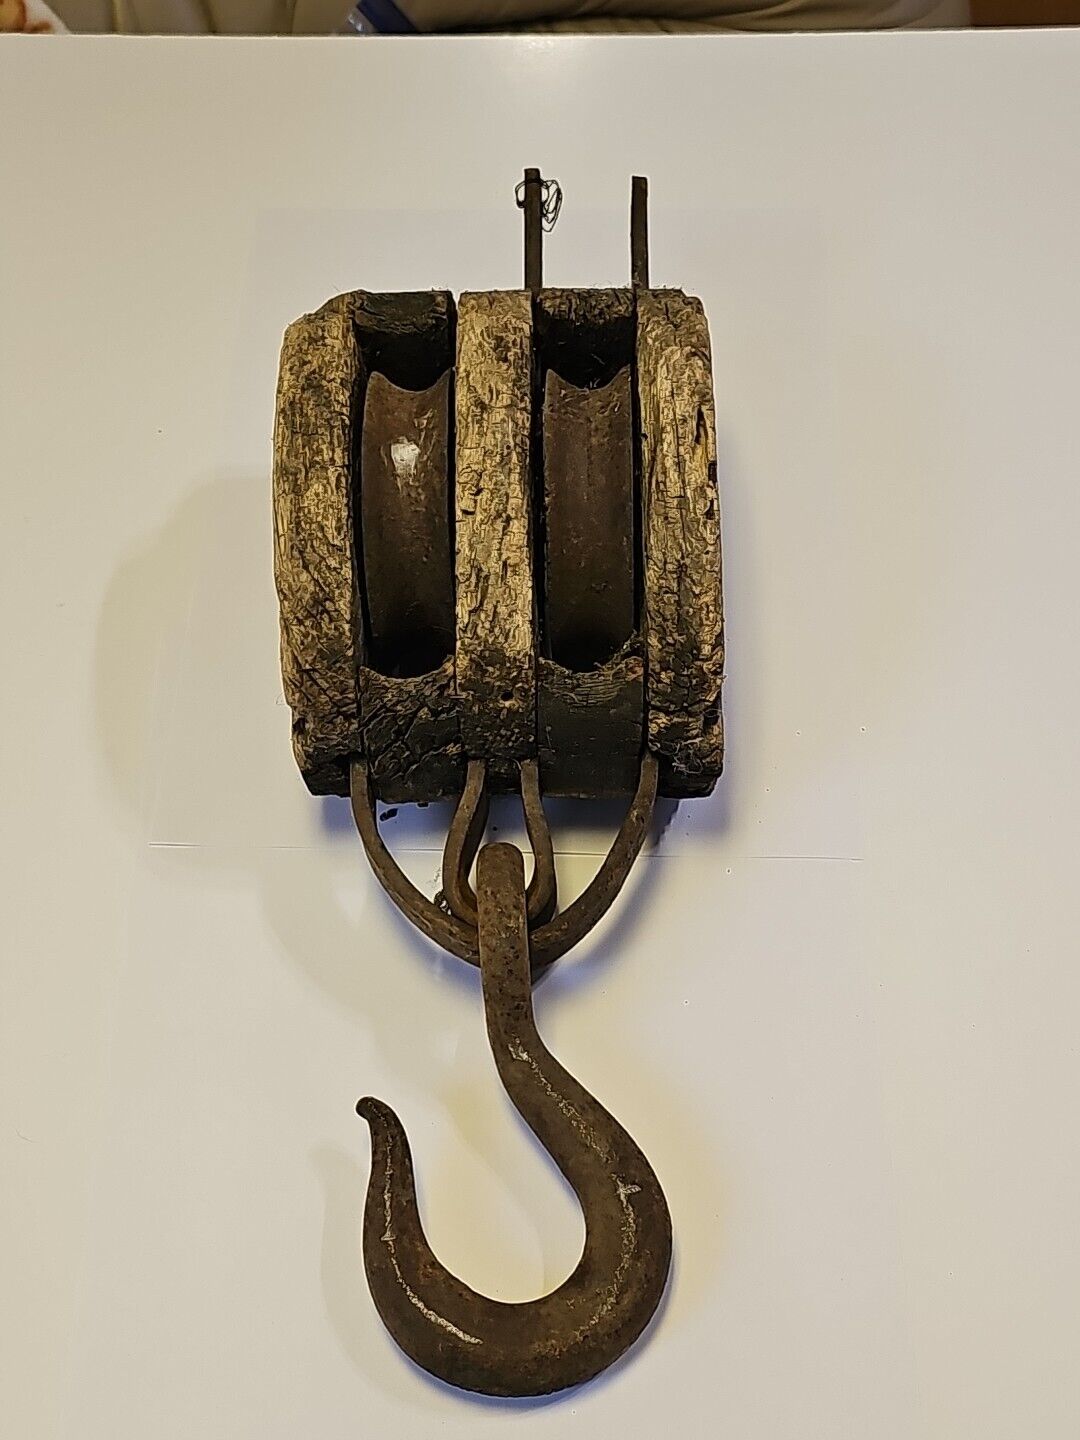 OLD Wooden block and tackle 4.5x4x15 Inches Aprox